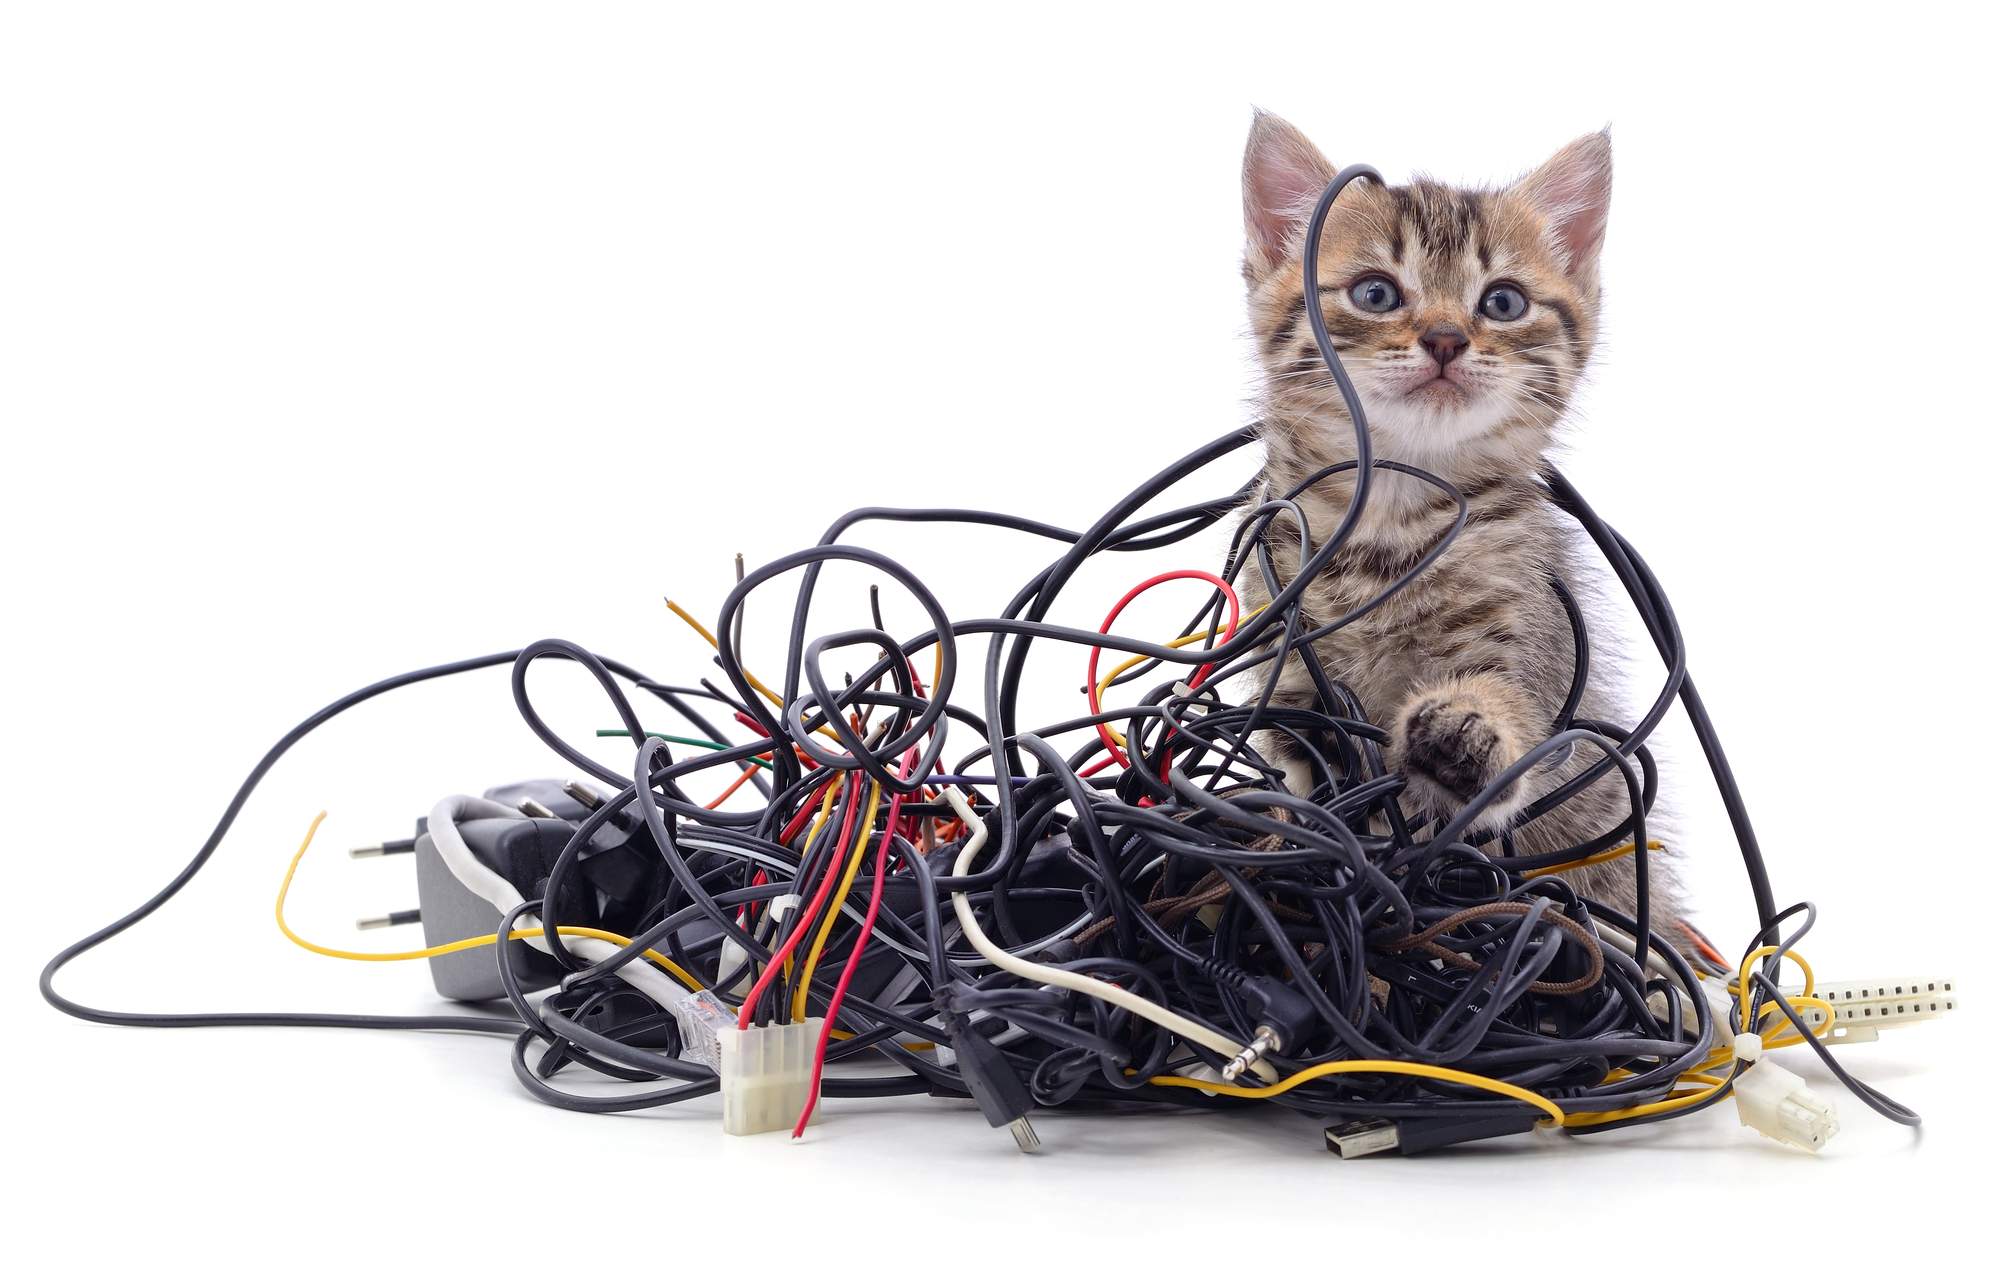 Can Your Cybersecurity Posture Stand Up to… Cats?